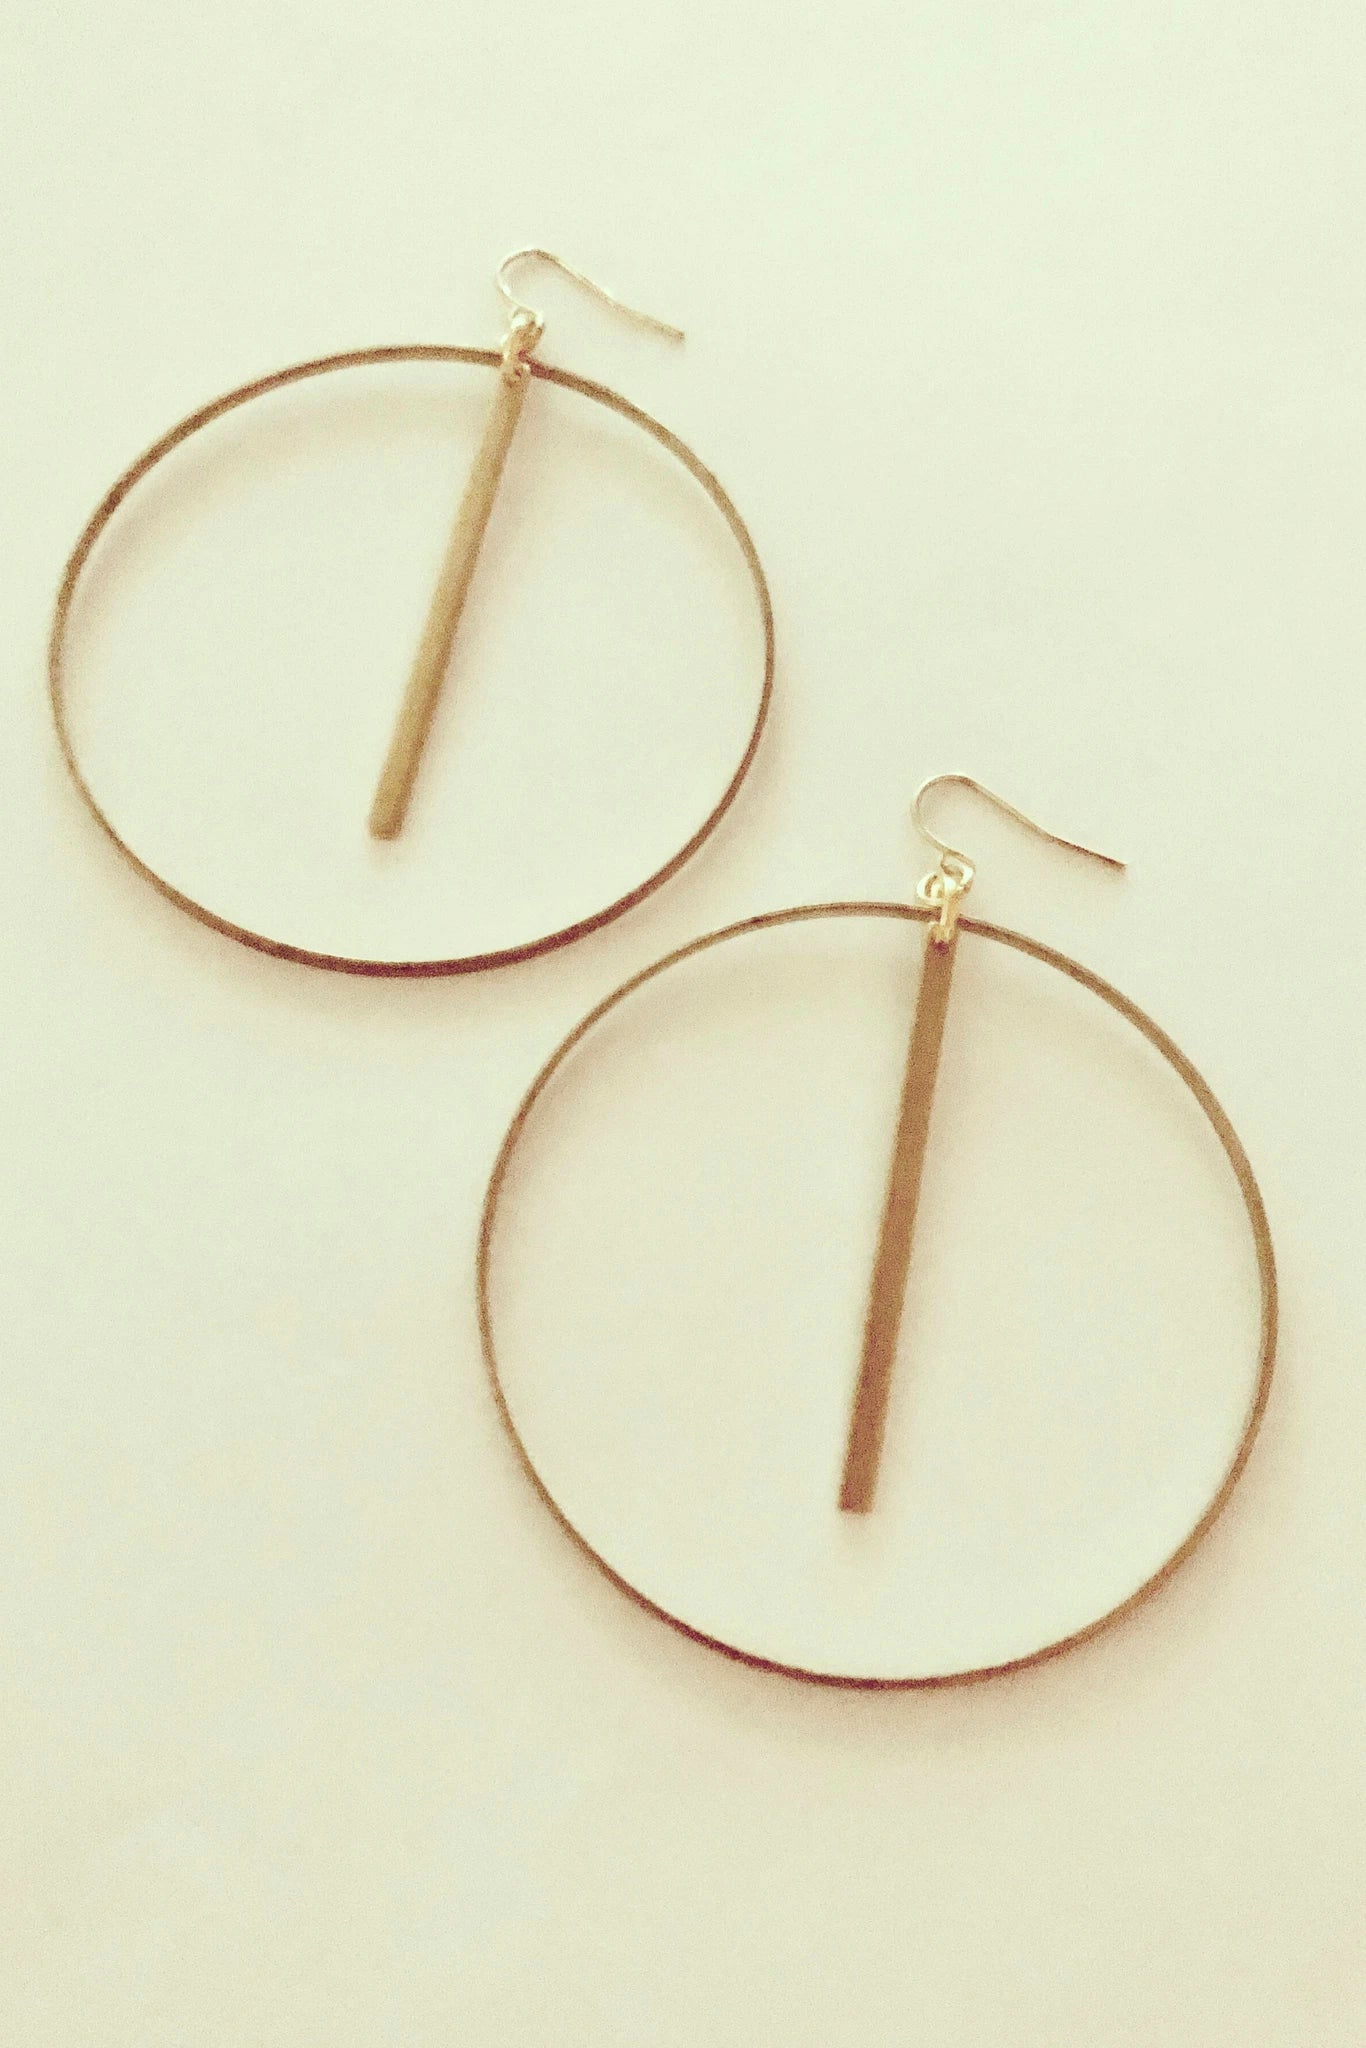 Myne by Darlings of Denmark; large, thin hoops with a hanging stick; raw brass; flat lay